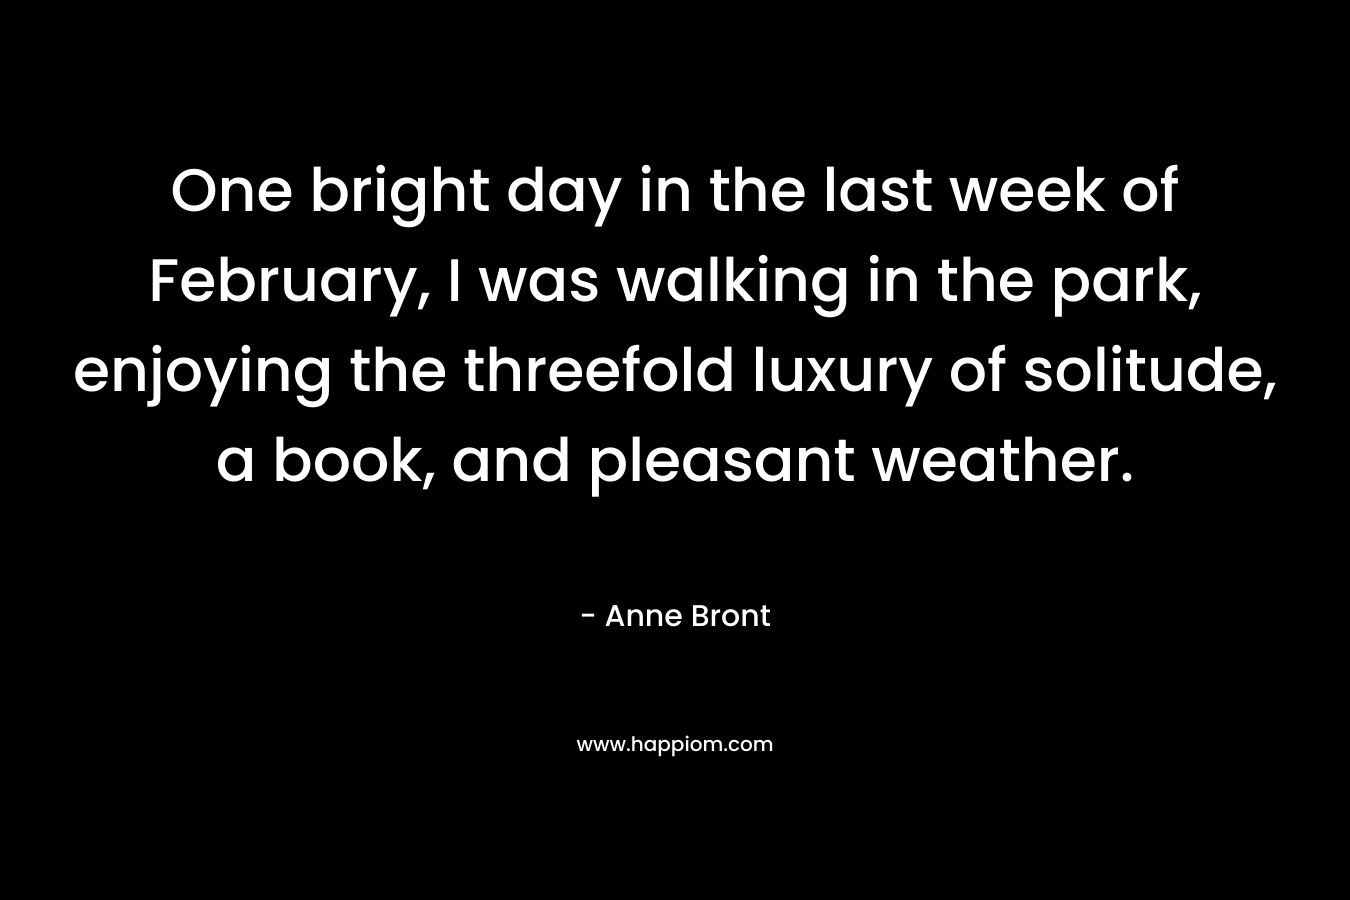 One bright day in the last week of February, I was walking in the park, enjoying the threefold luxury of solitude, a book, and pleasant weather. – Anne Bront